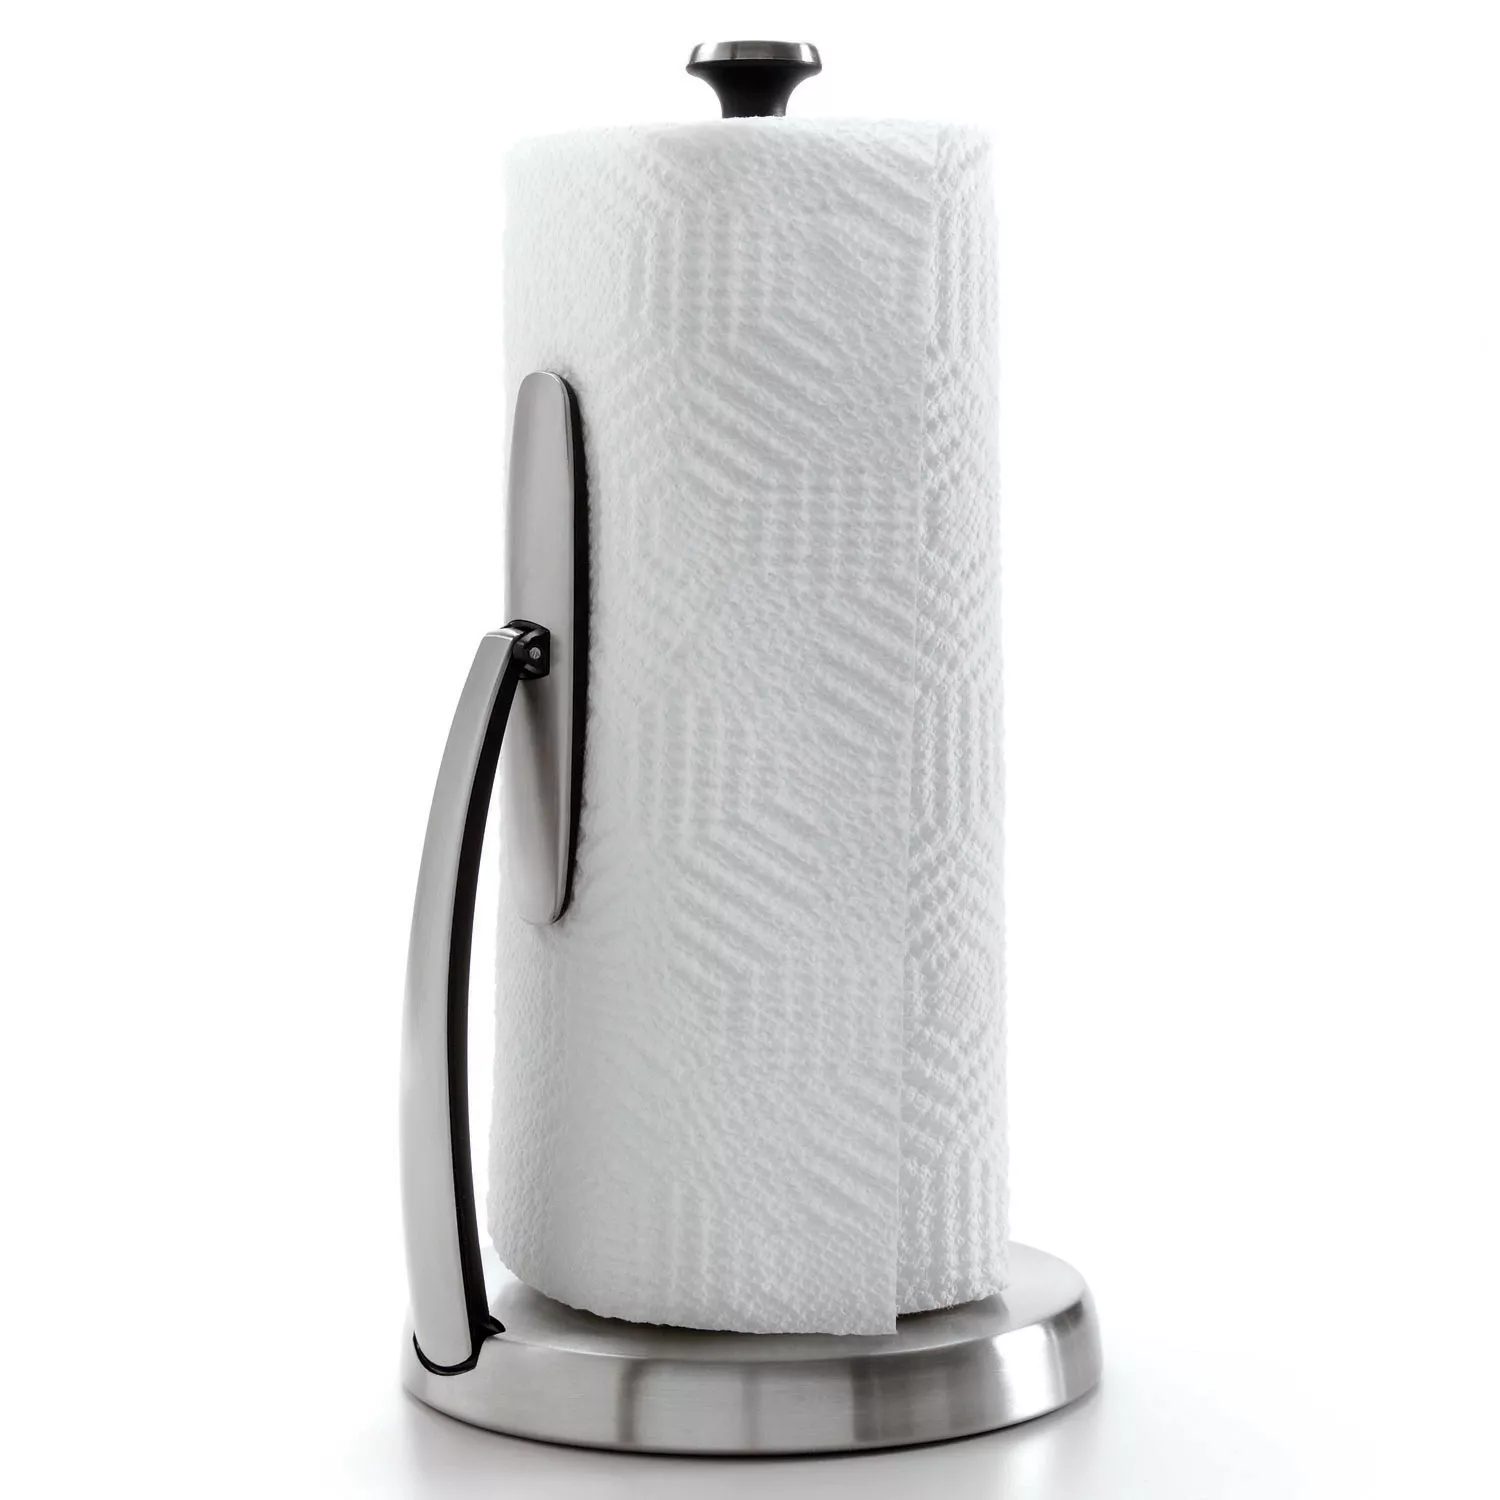 Stainless Steel White Paper Towel Holder Designed for Easy One-Handed  Operation - This Sturdy Weighted Paper Towel Dispenser Countertop Model Has